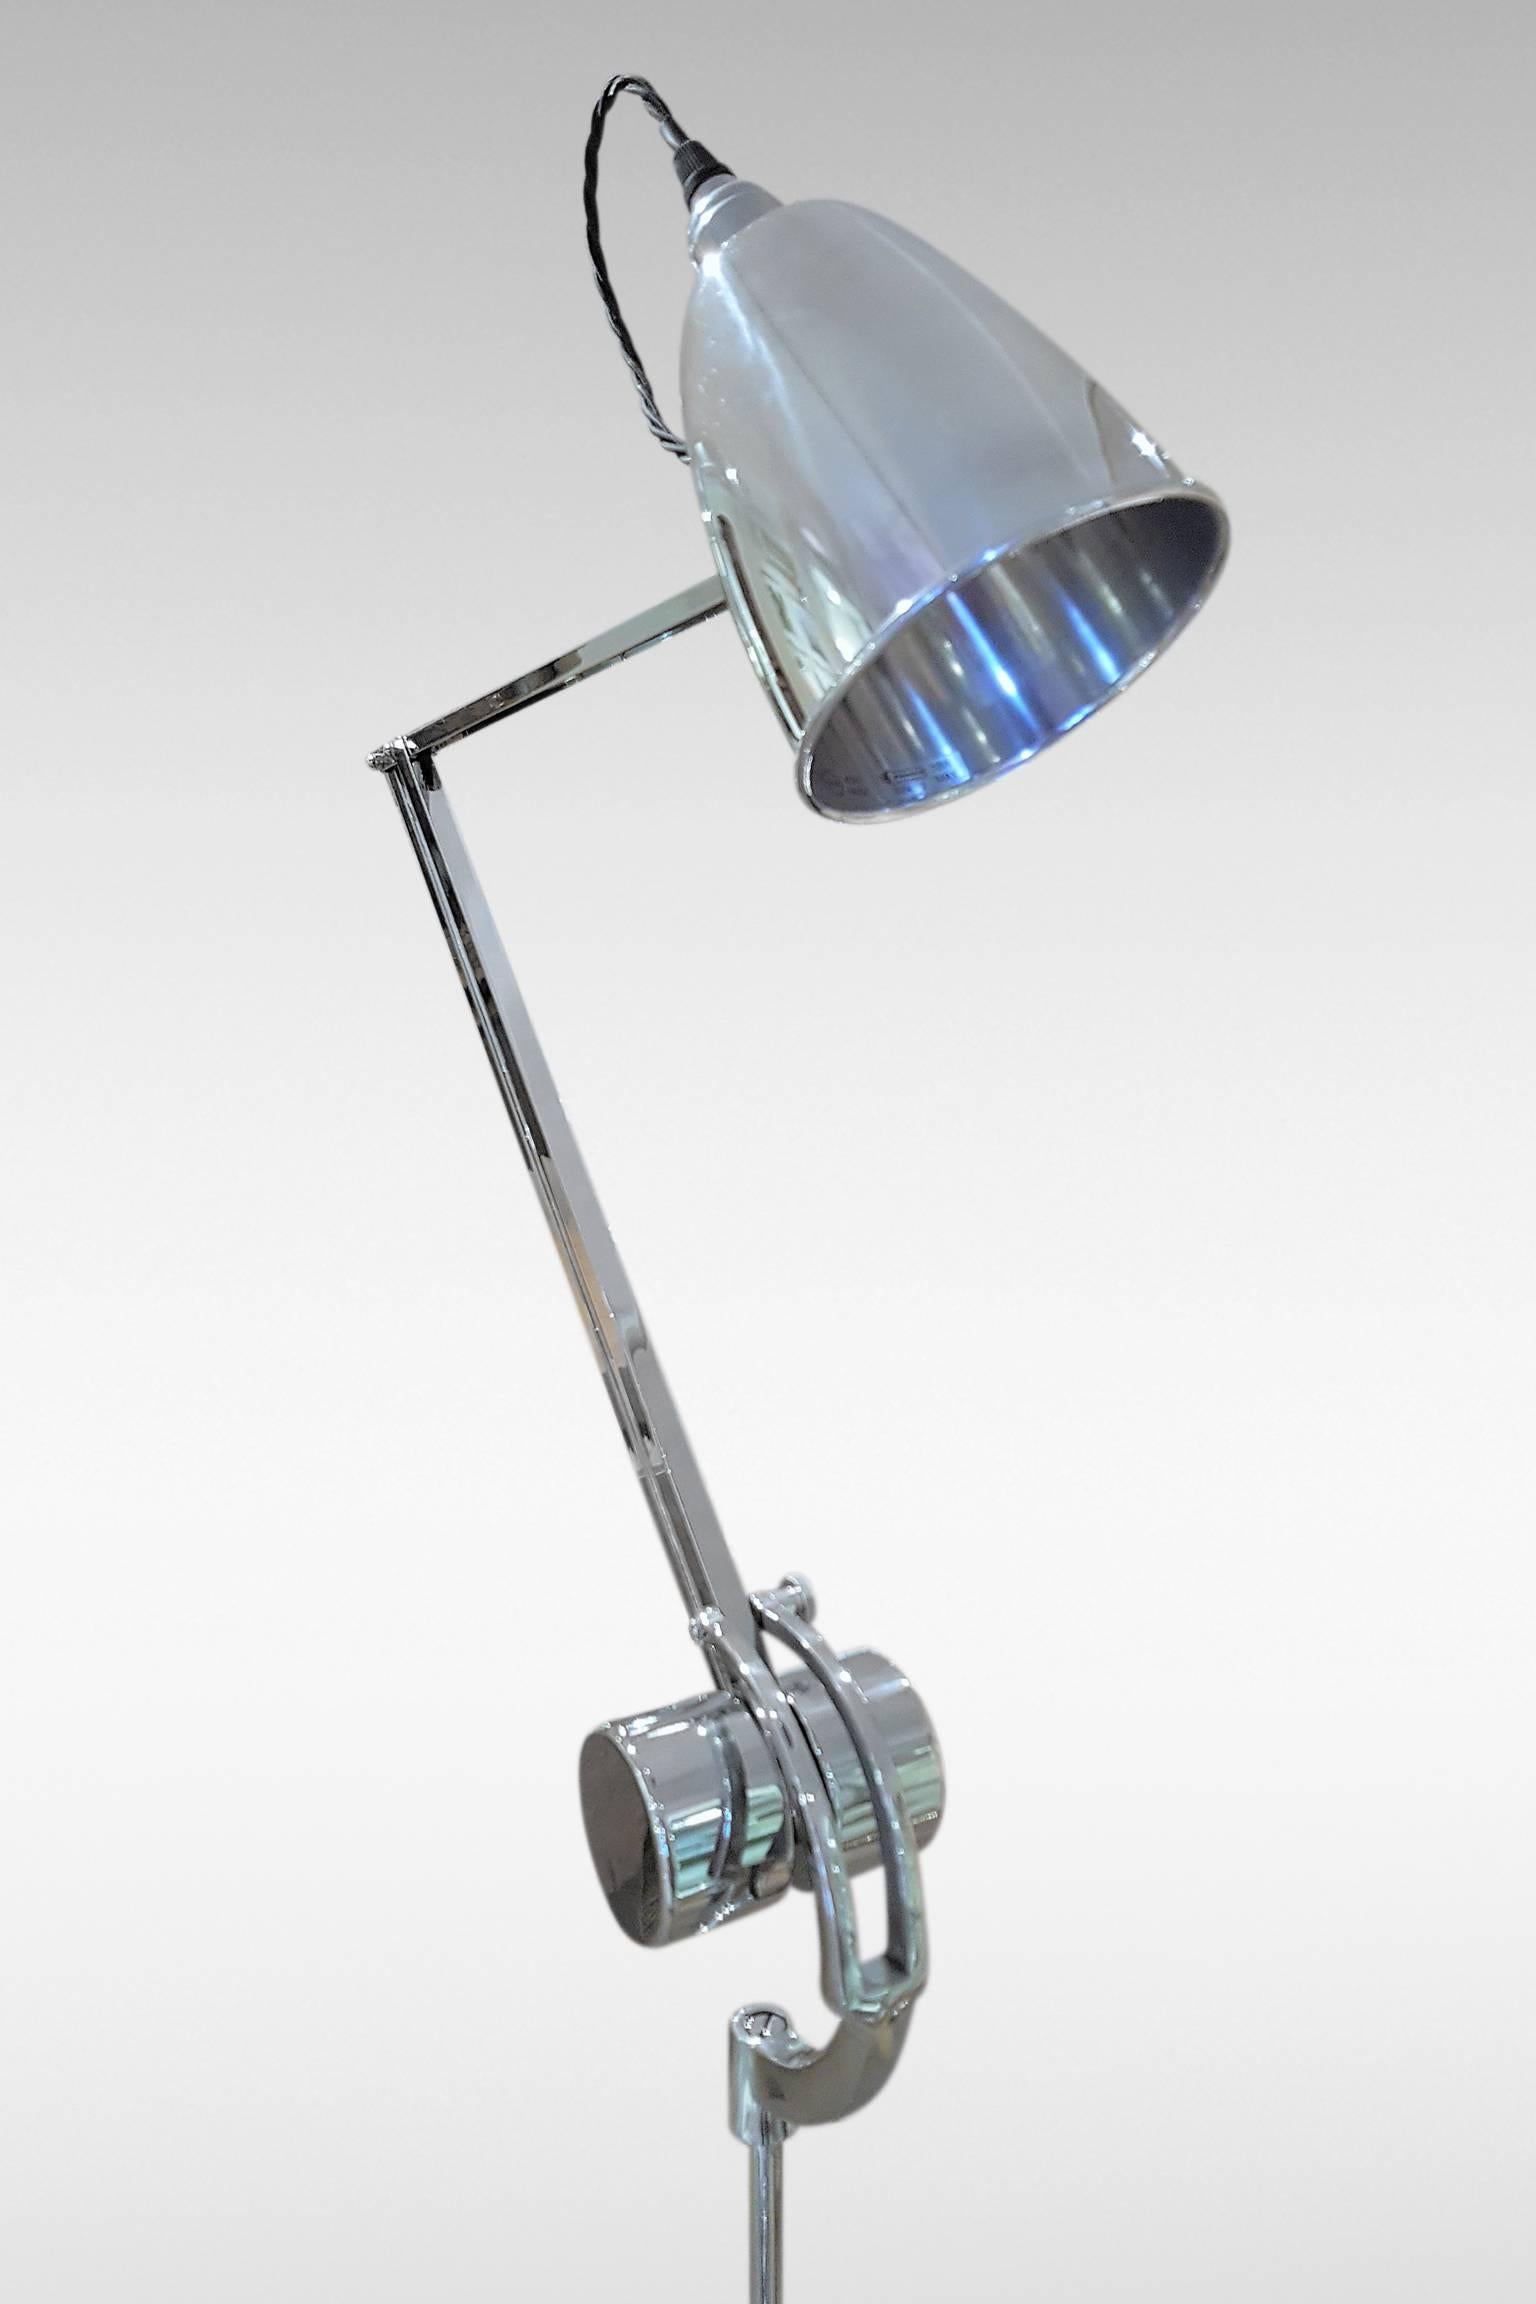 An original superbly modernist Art Deco trolley counterpoise lamp manufactured by Hadrill & Horstmann Ltd of Godlaming, Surrey UK, with the maker's impressed mark. These lamps are amazingly versatile and fully adjustable for height, angle and